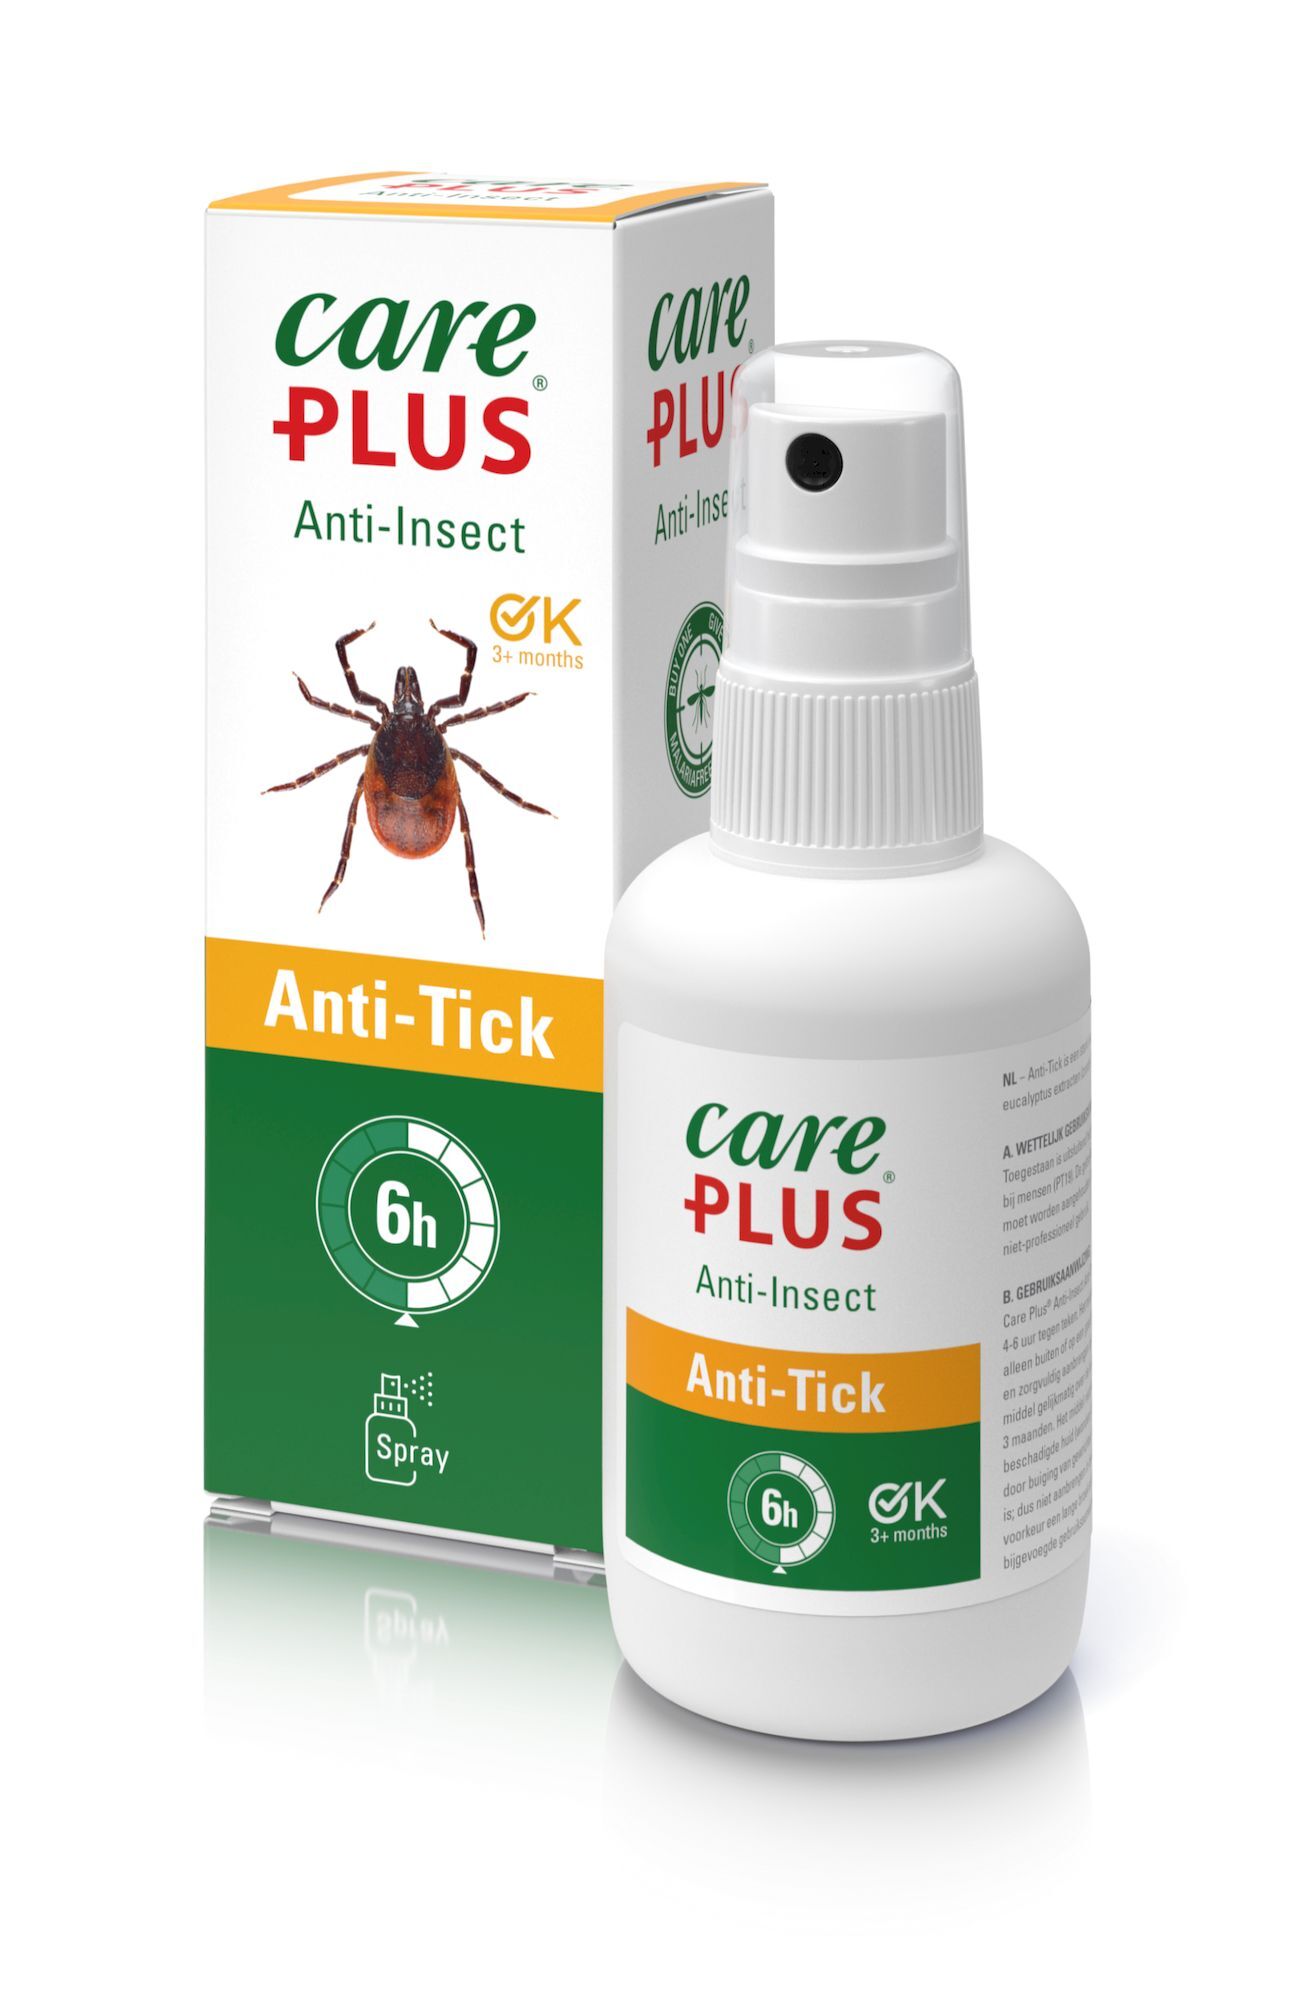 Care Plus Anti-Insect Anti-Tick - Hyönteismyrkky | Hardloop